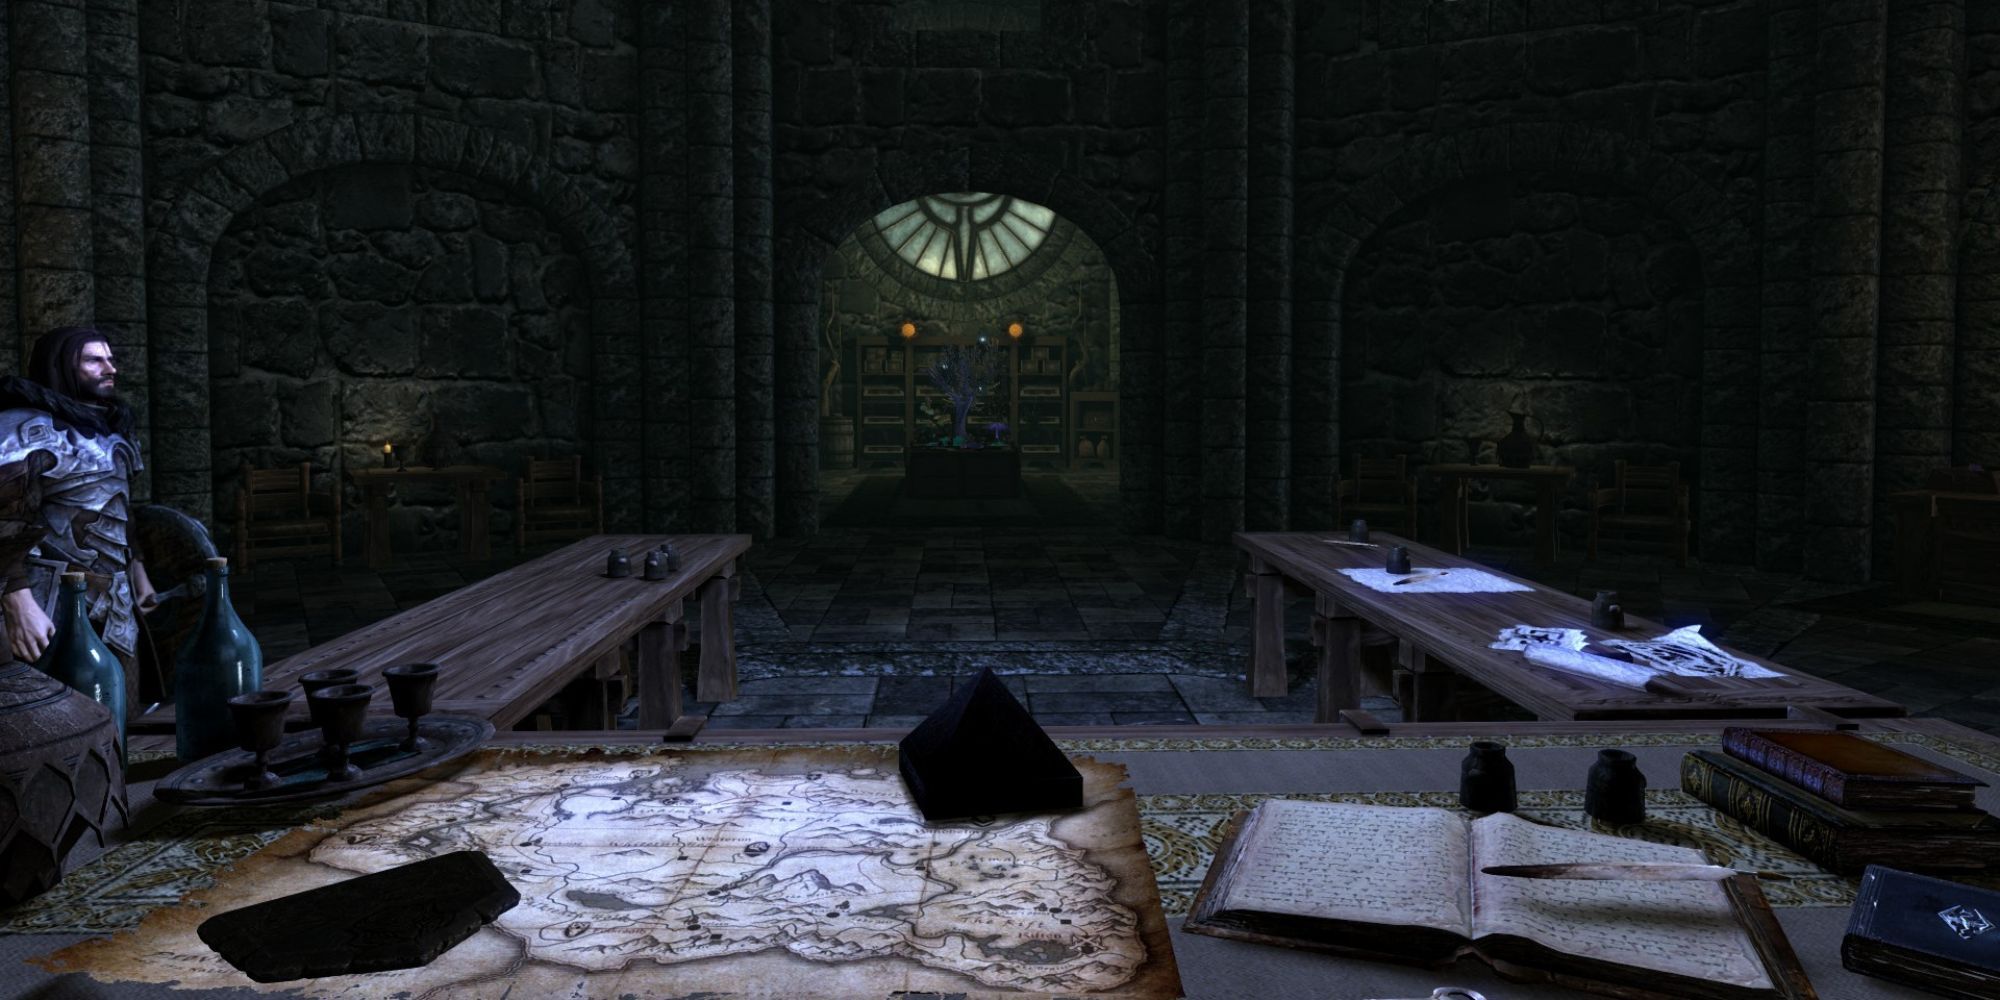 A view of the revamped Archmage's Quarters from the Archmage's seat on the long desk filled with notes, books, a map, and other clutter